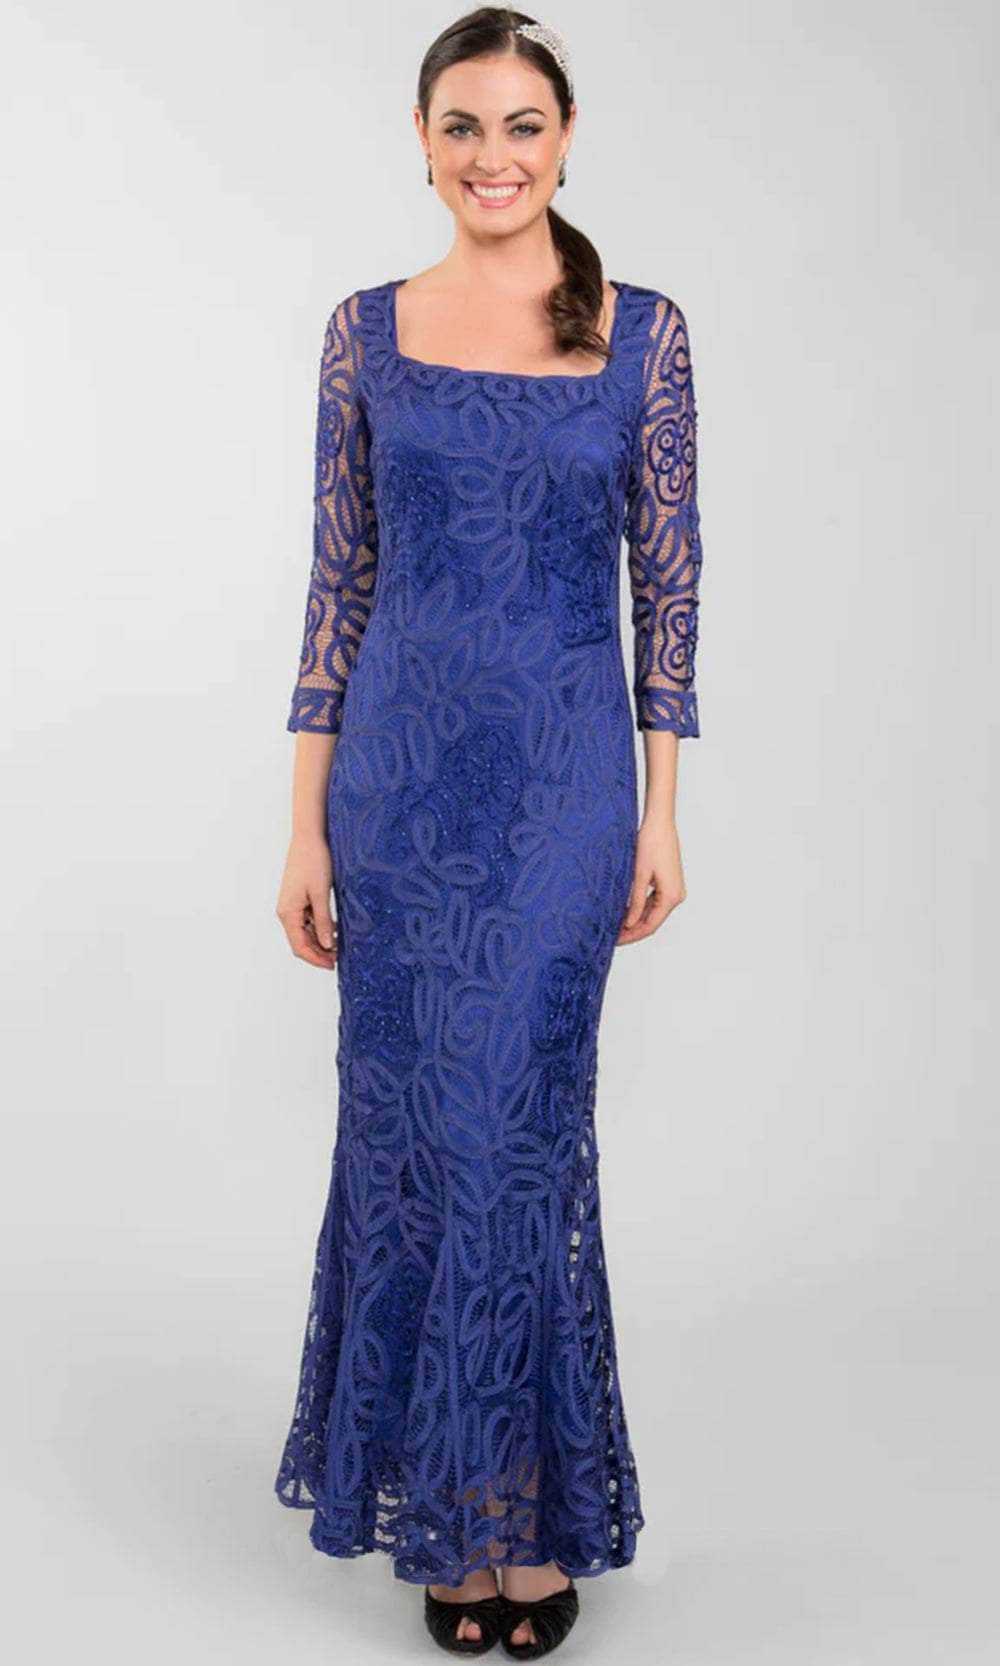 Soulmates, Soulmates D9121 - Embroidered Dress